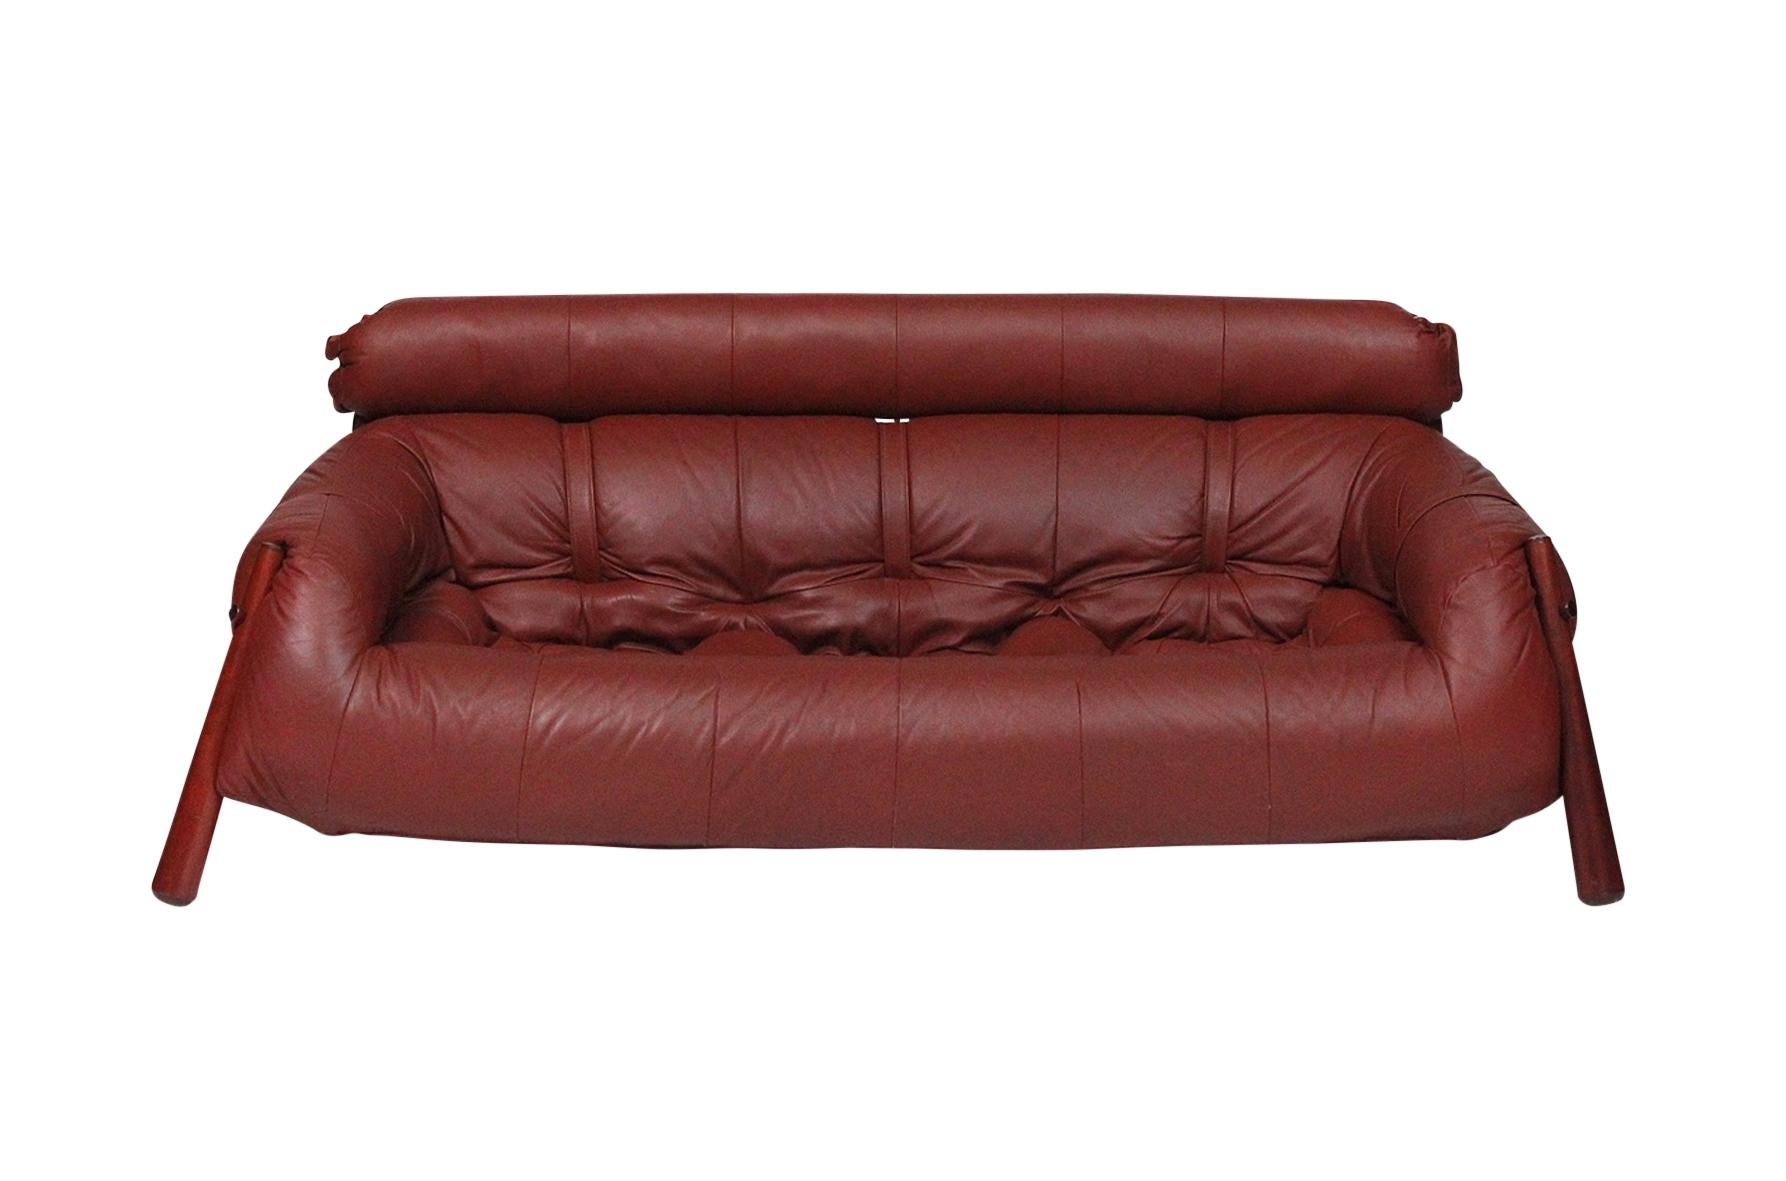 Sculptural sofa in exotic wood and brown leather by Brazilian designer Percival Lafer.

____

We're offering our customers free domestic shipping on all items during the current health crisis. We will also offer free or deeply discounted